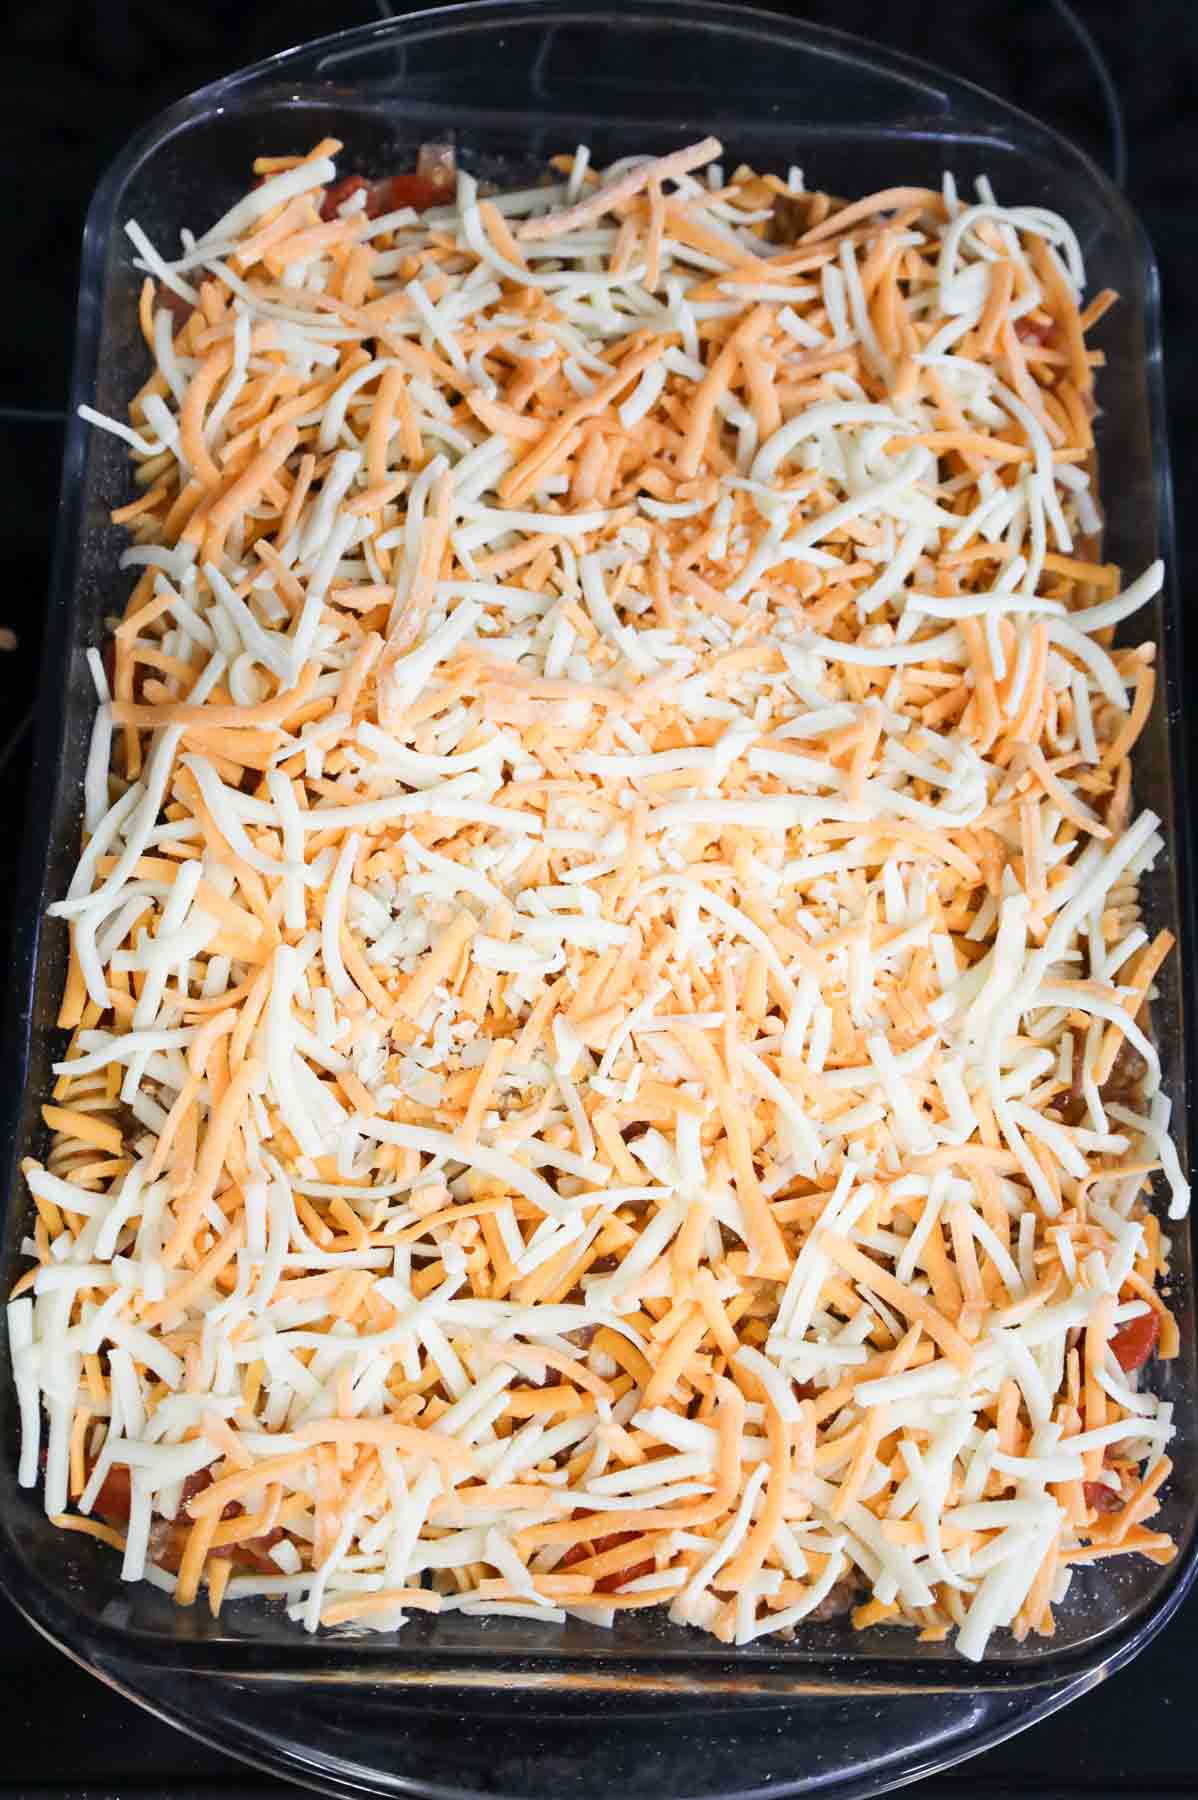 shredded cheddar cheese on top of ground beef pasta mixture in a baking dish